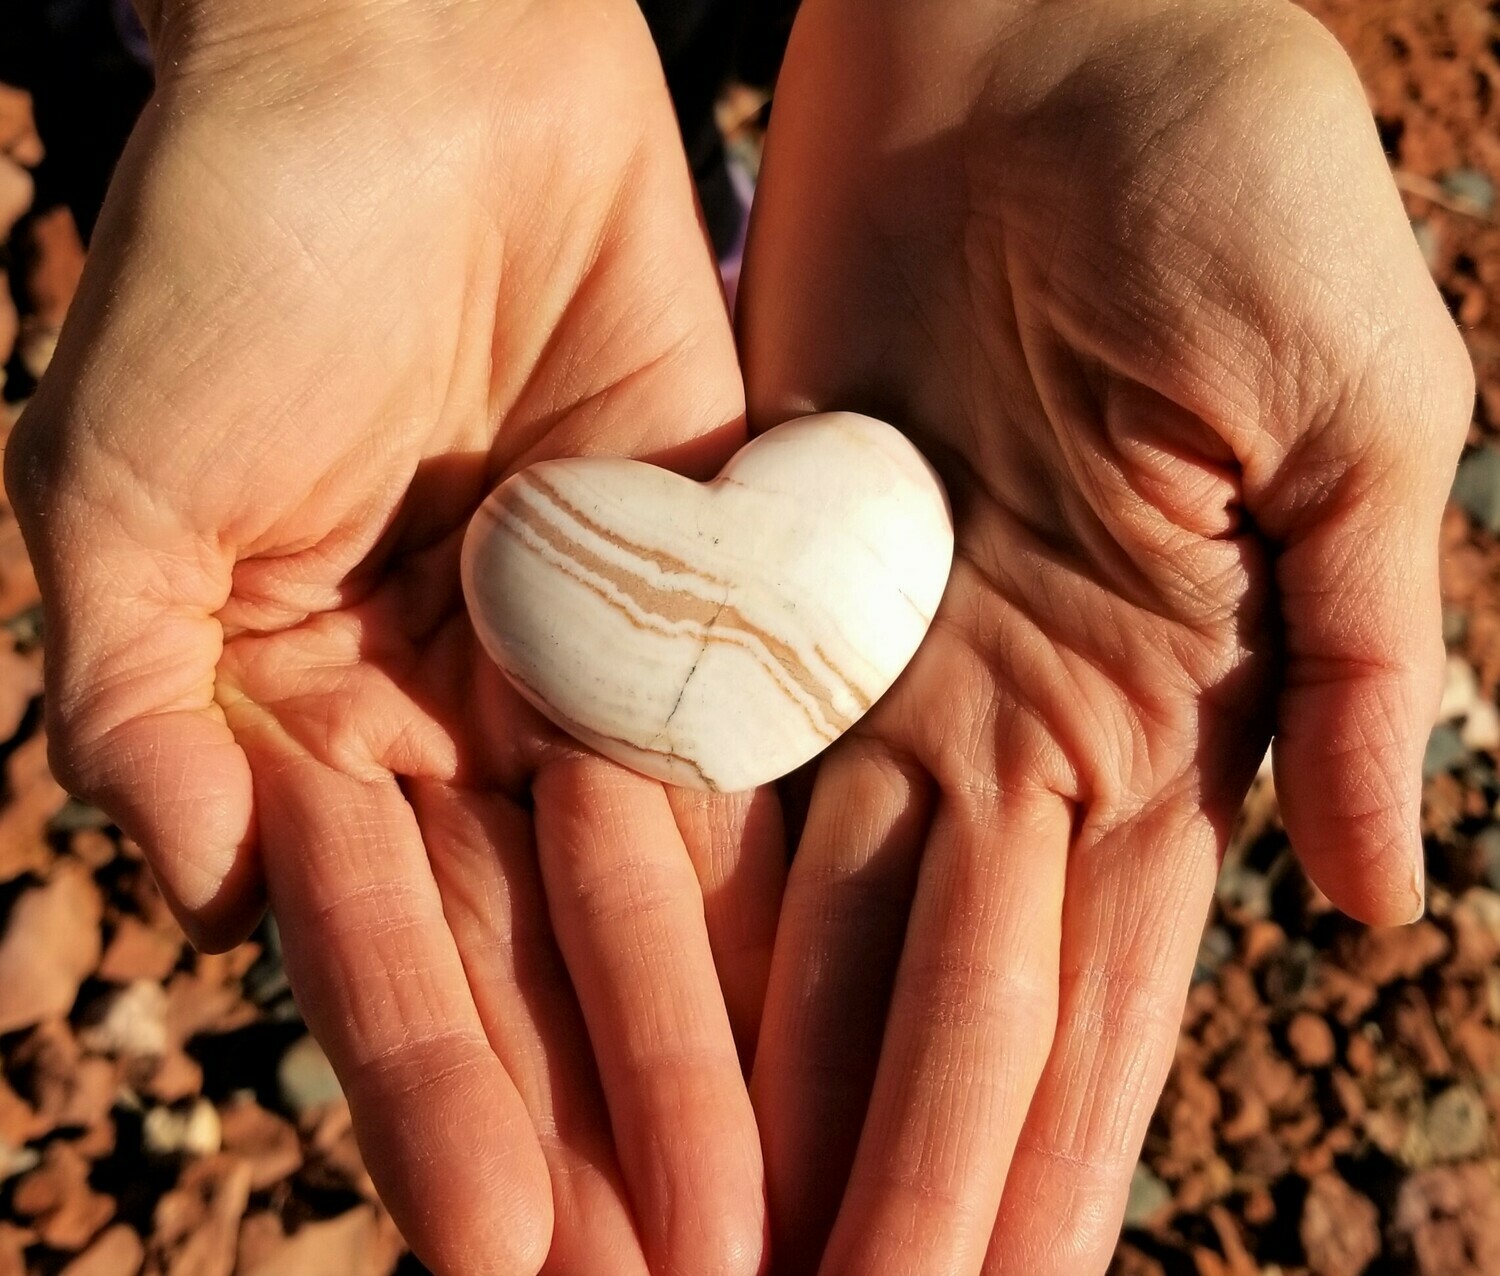 Sedona White Light Crystal Holding Sacred Heart/Red Rock Ley lines of Mother Earth's LOVE/Language of light, Grid Worker & Healer/ Christmas Sale $99/133.00